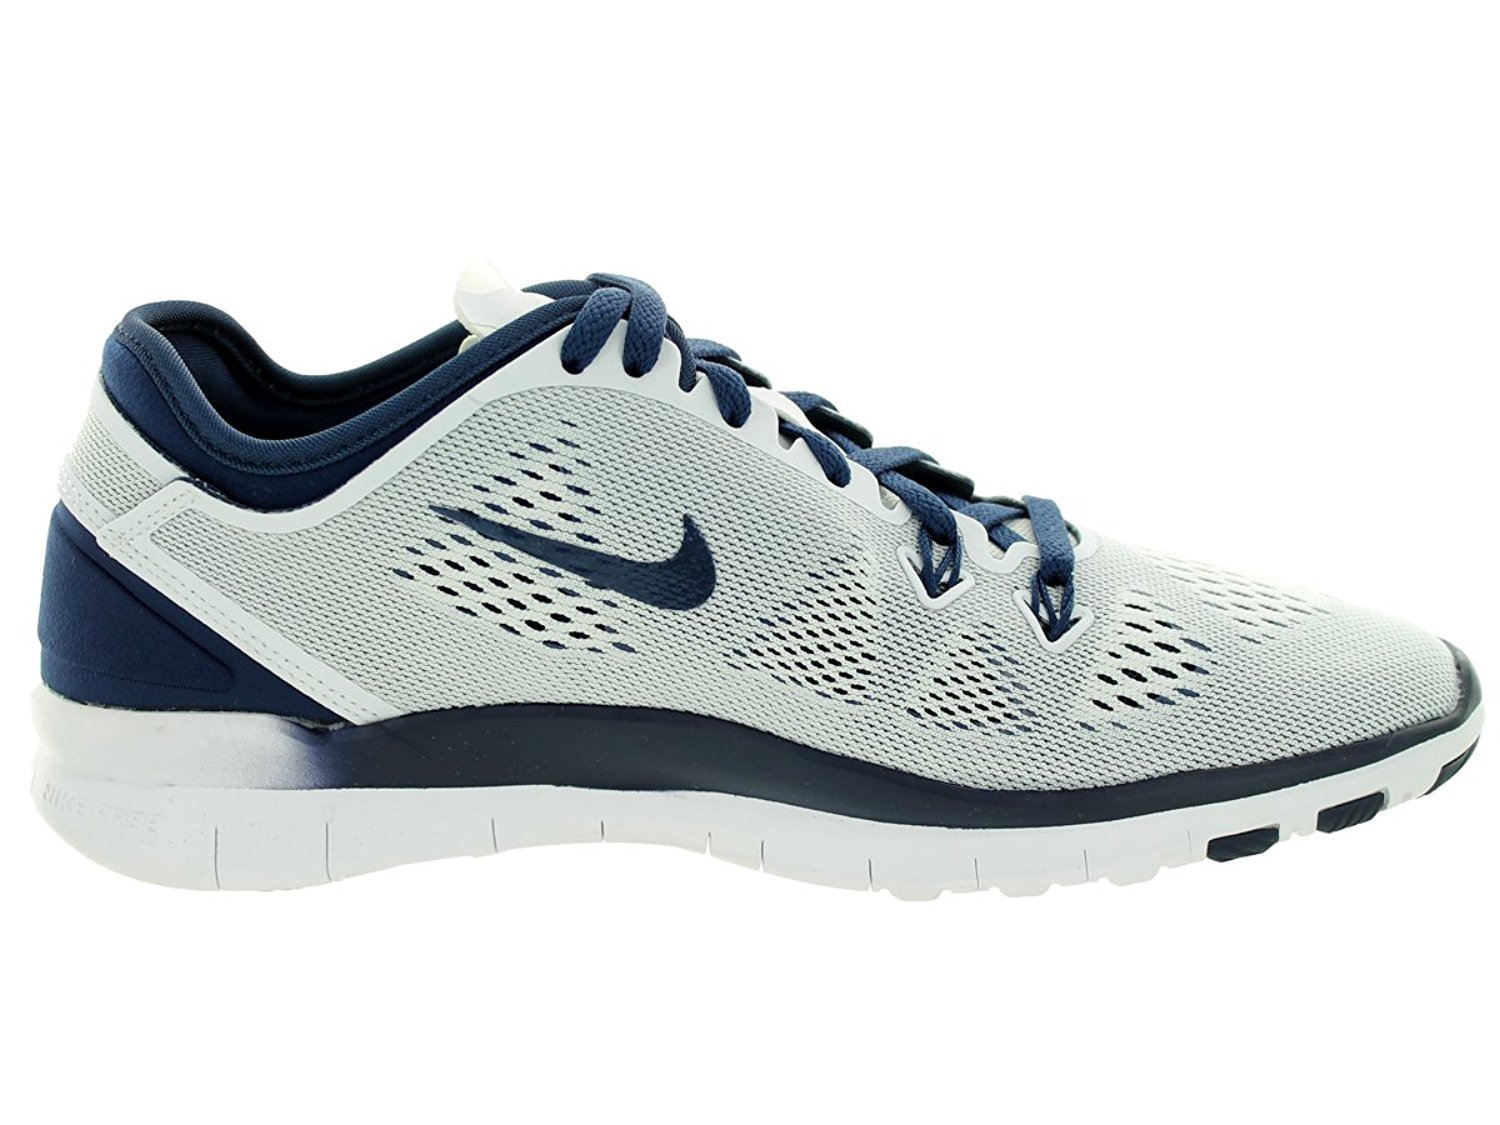 Nike Free 5.0 TR Fit 5 Women's Cross Training Shoes (5.5, WHITE/MIDNIGHT NAVY) - image 5 of 5